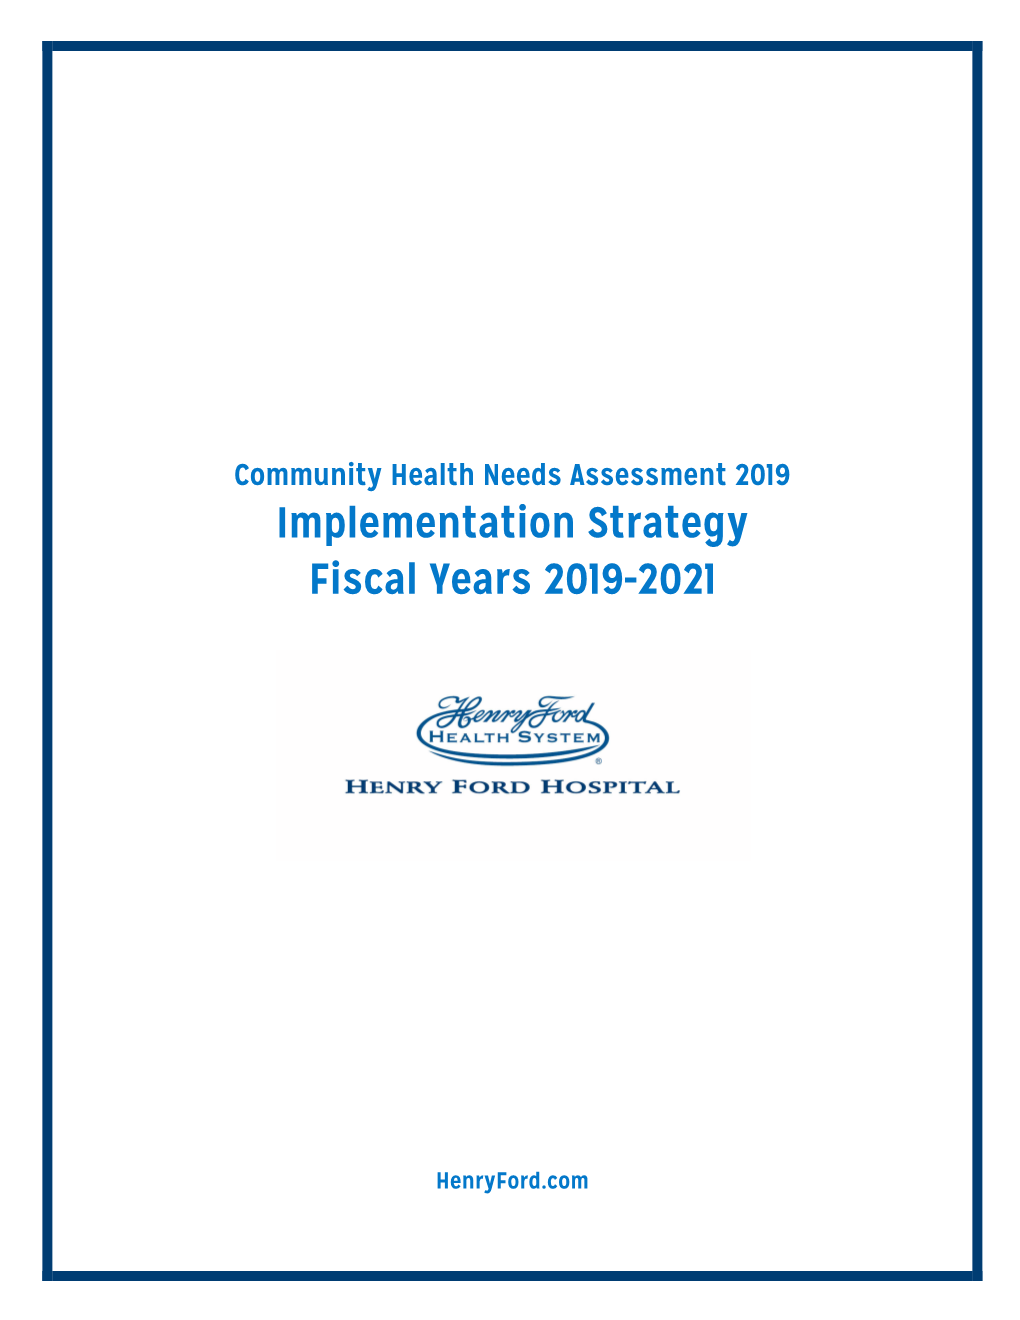 Implementation Strategy Fiscal Years 2019-2021